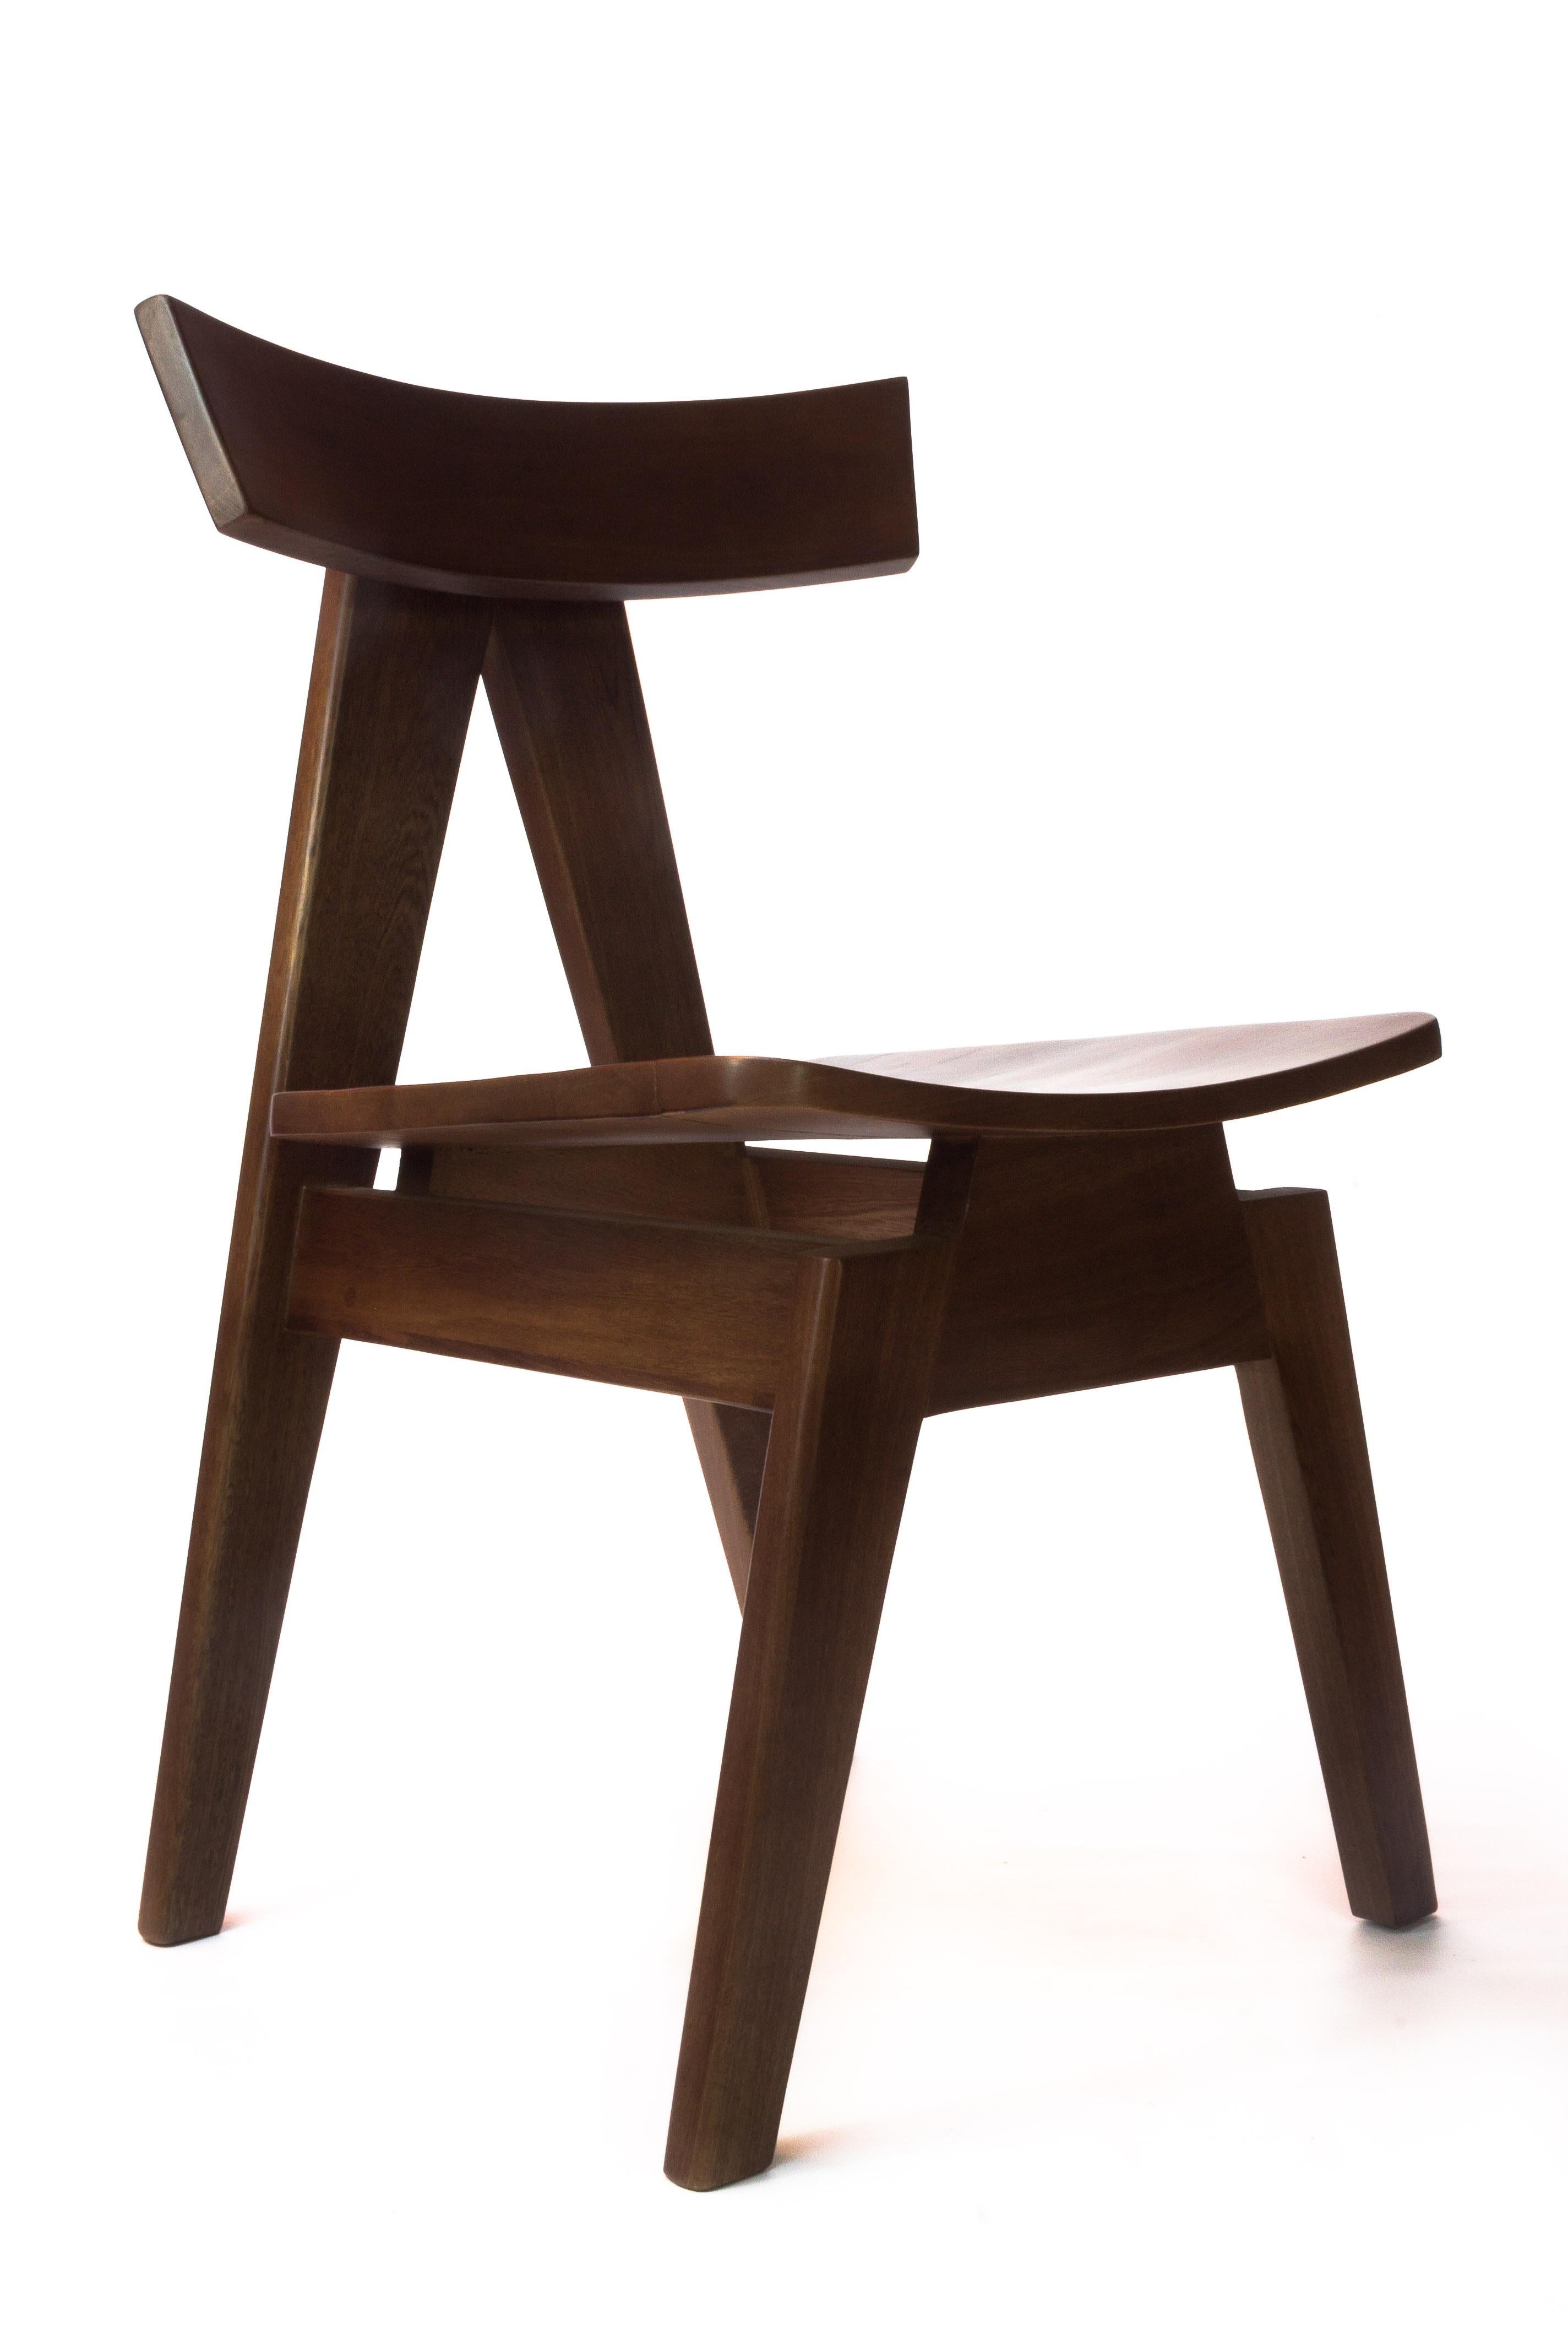 Contemporary Marques Chair, by Camilo Andres Rodriguez Marquez